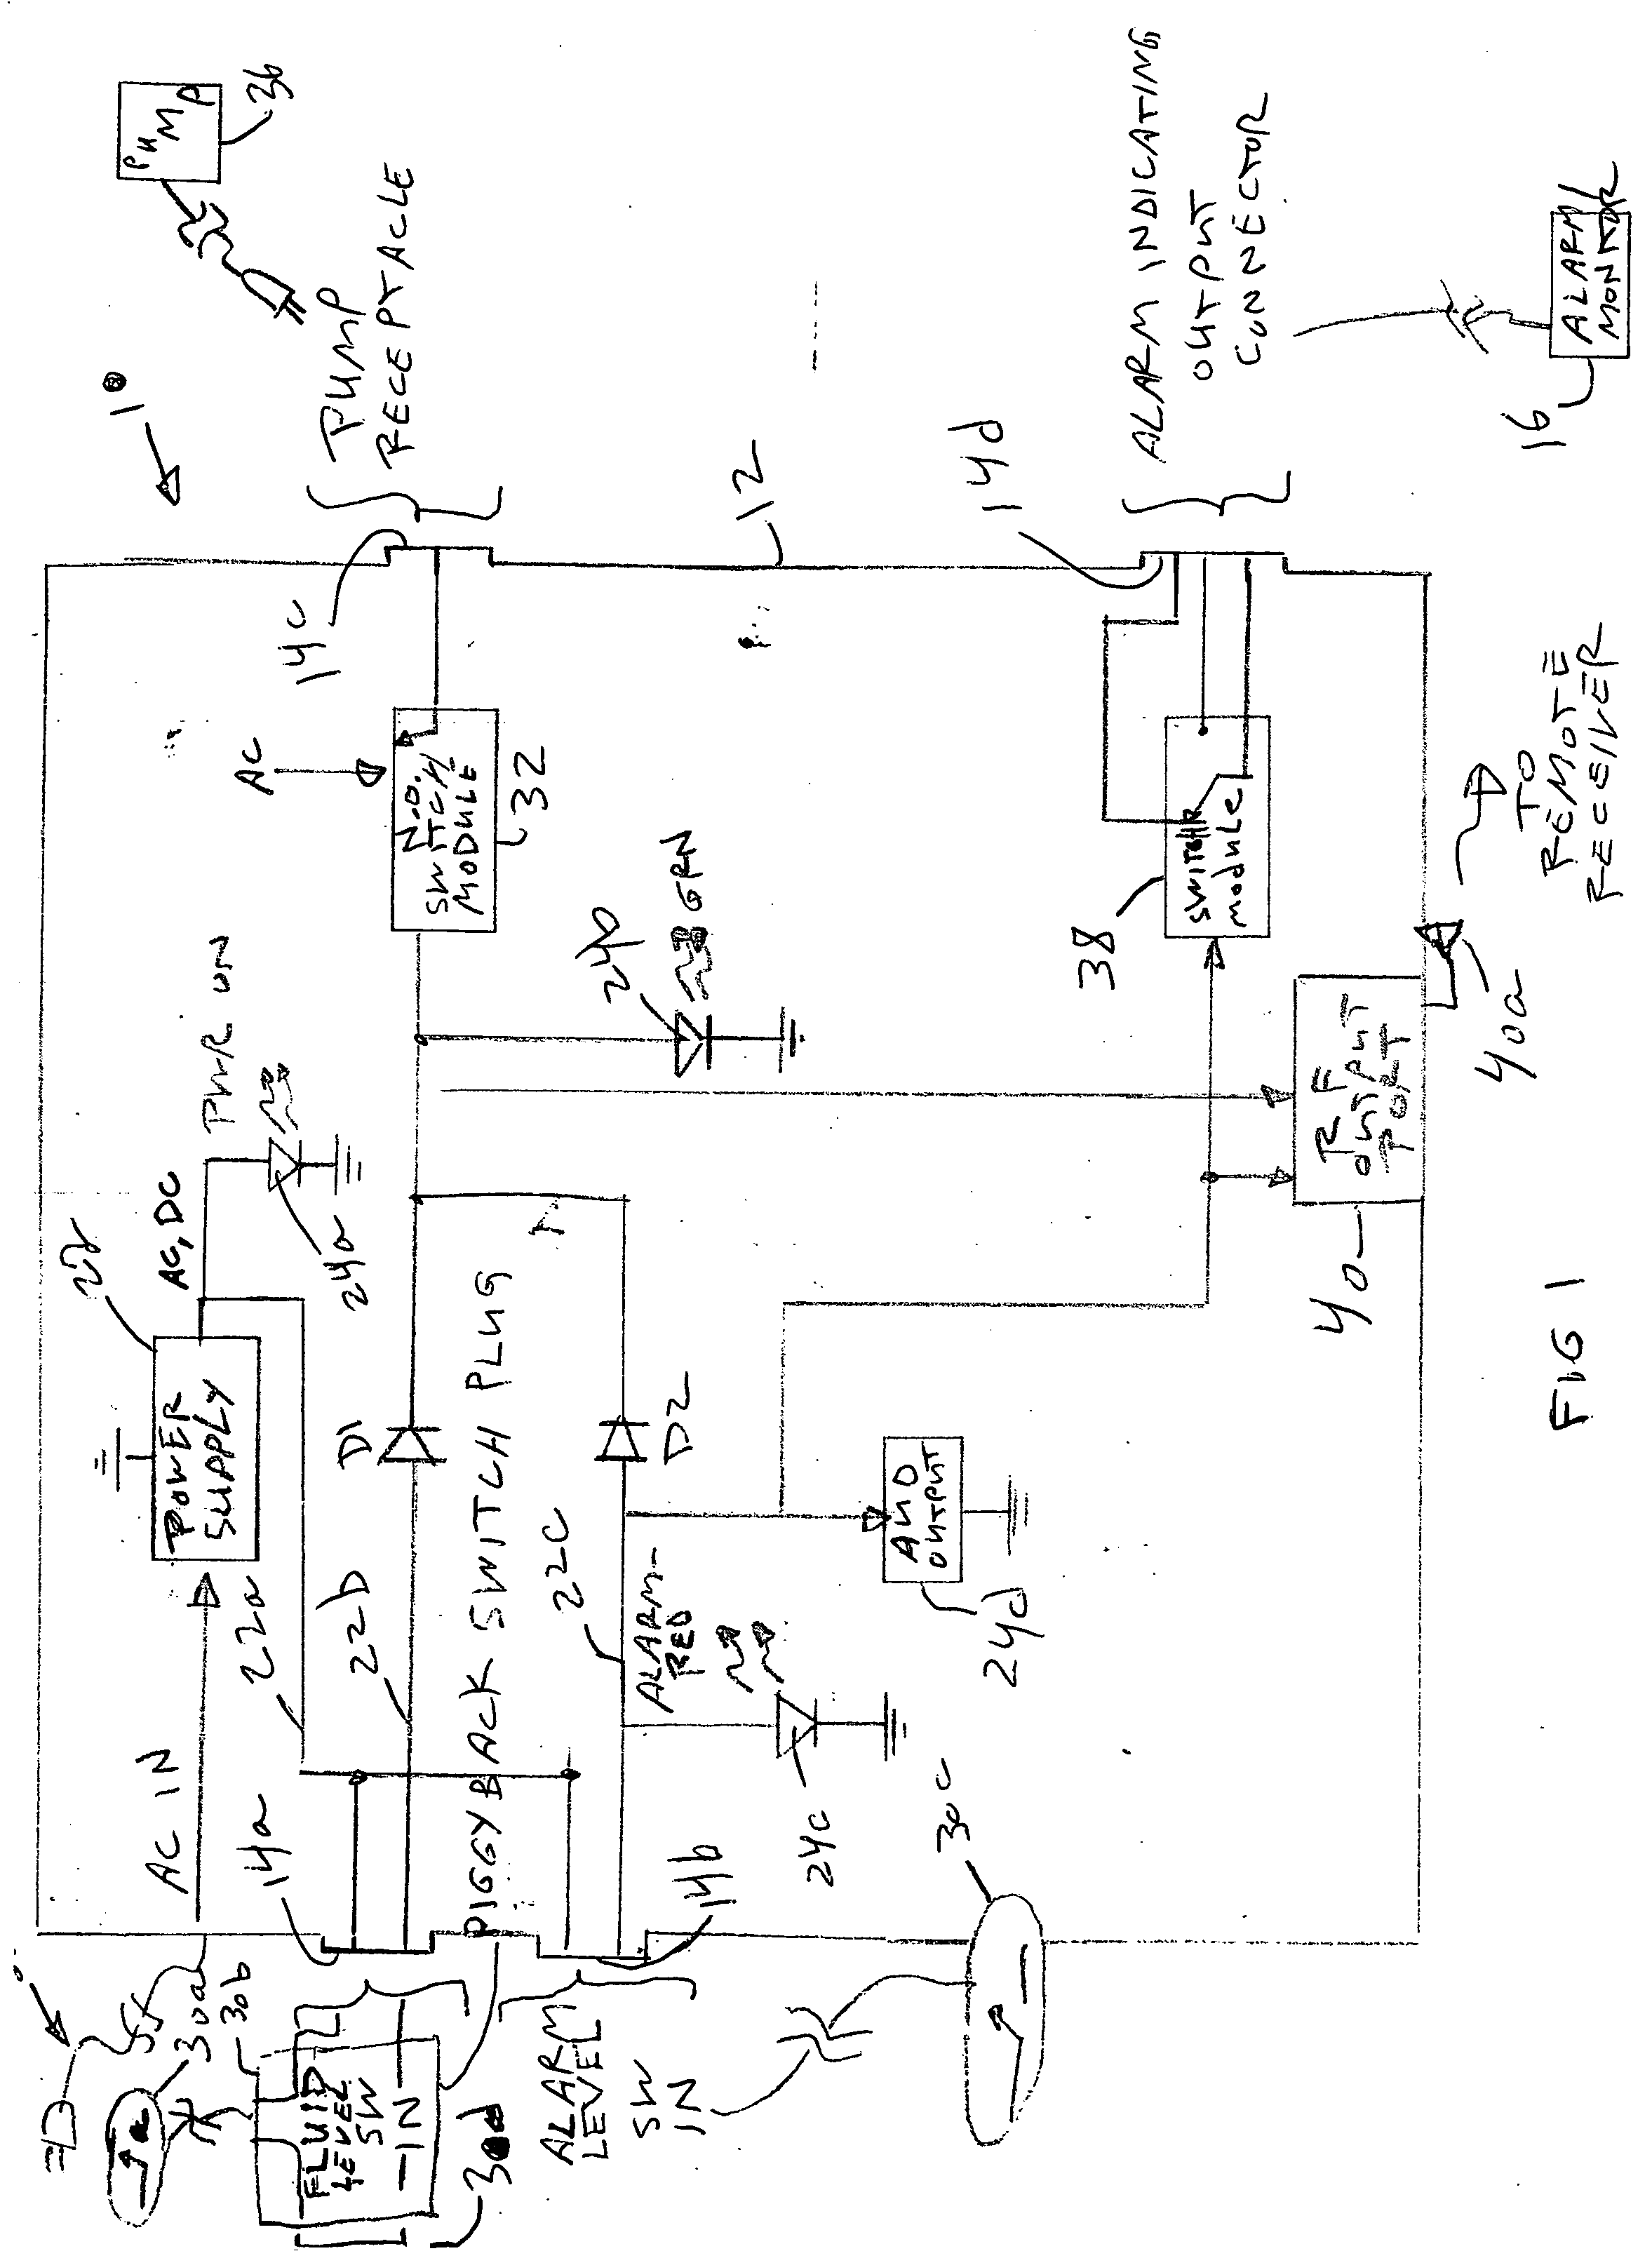 Pump connector system